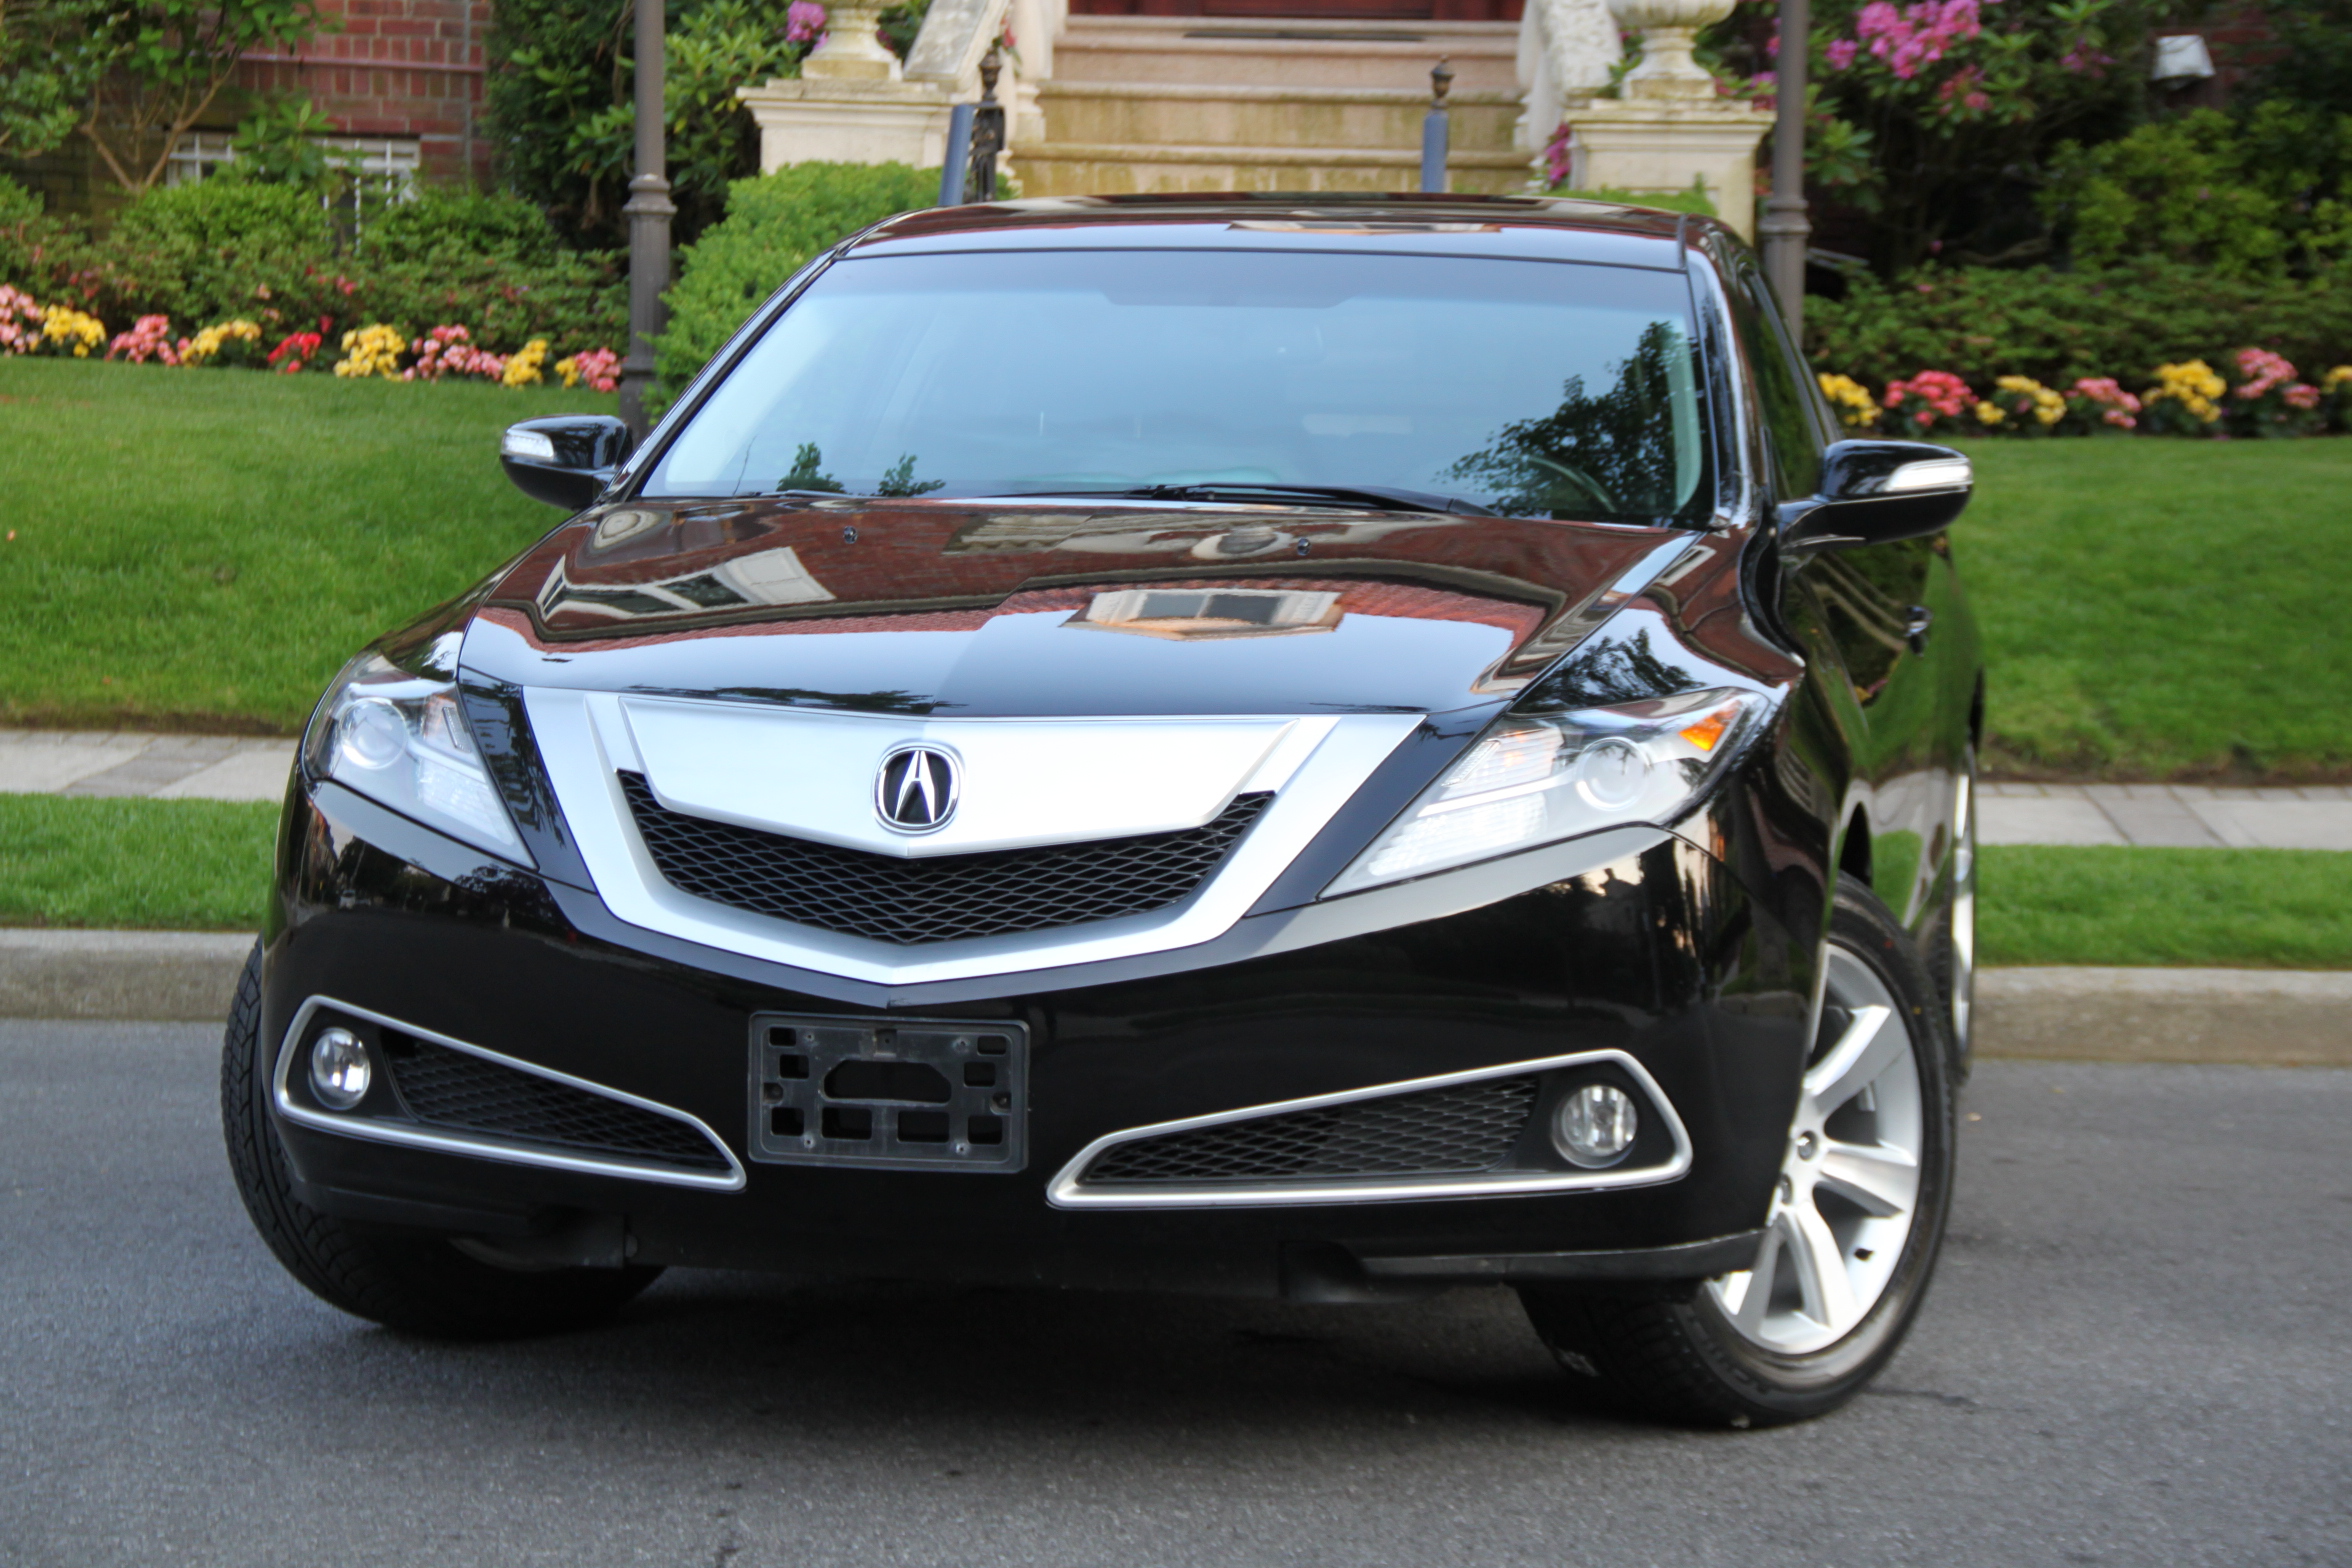 Buy Used 2012 ACURA ZDX TECHNOLOGY for $19 900 from trusted dealer in  Brooklyn, NY!